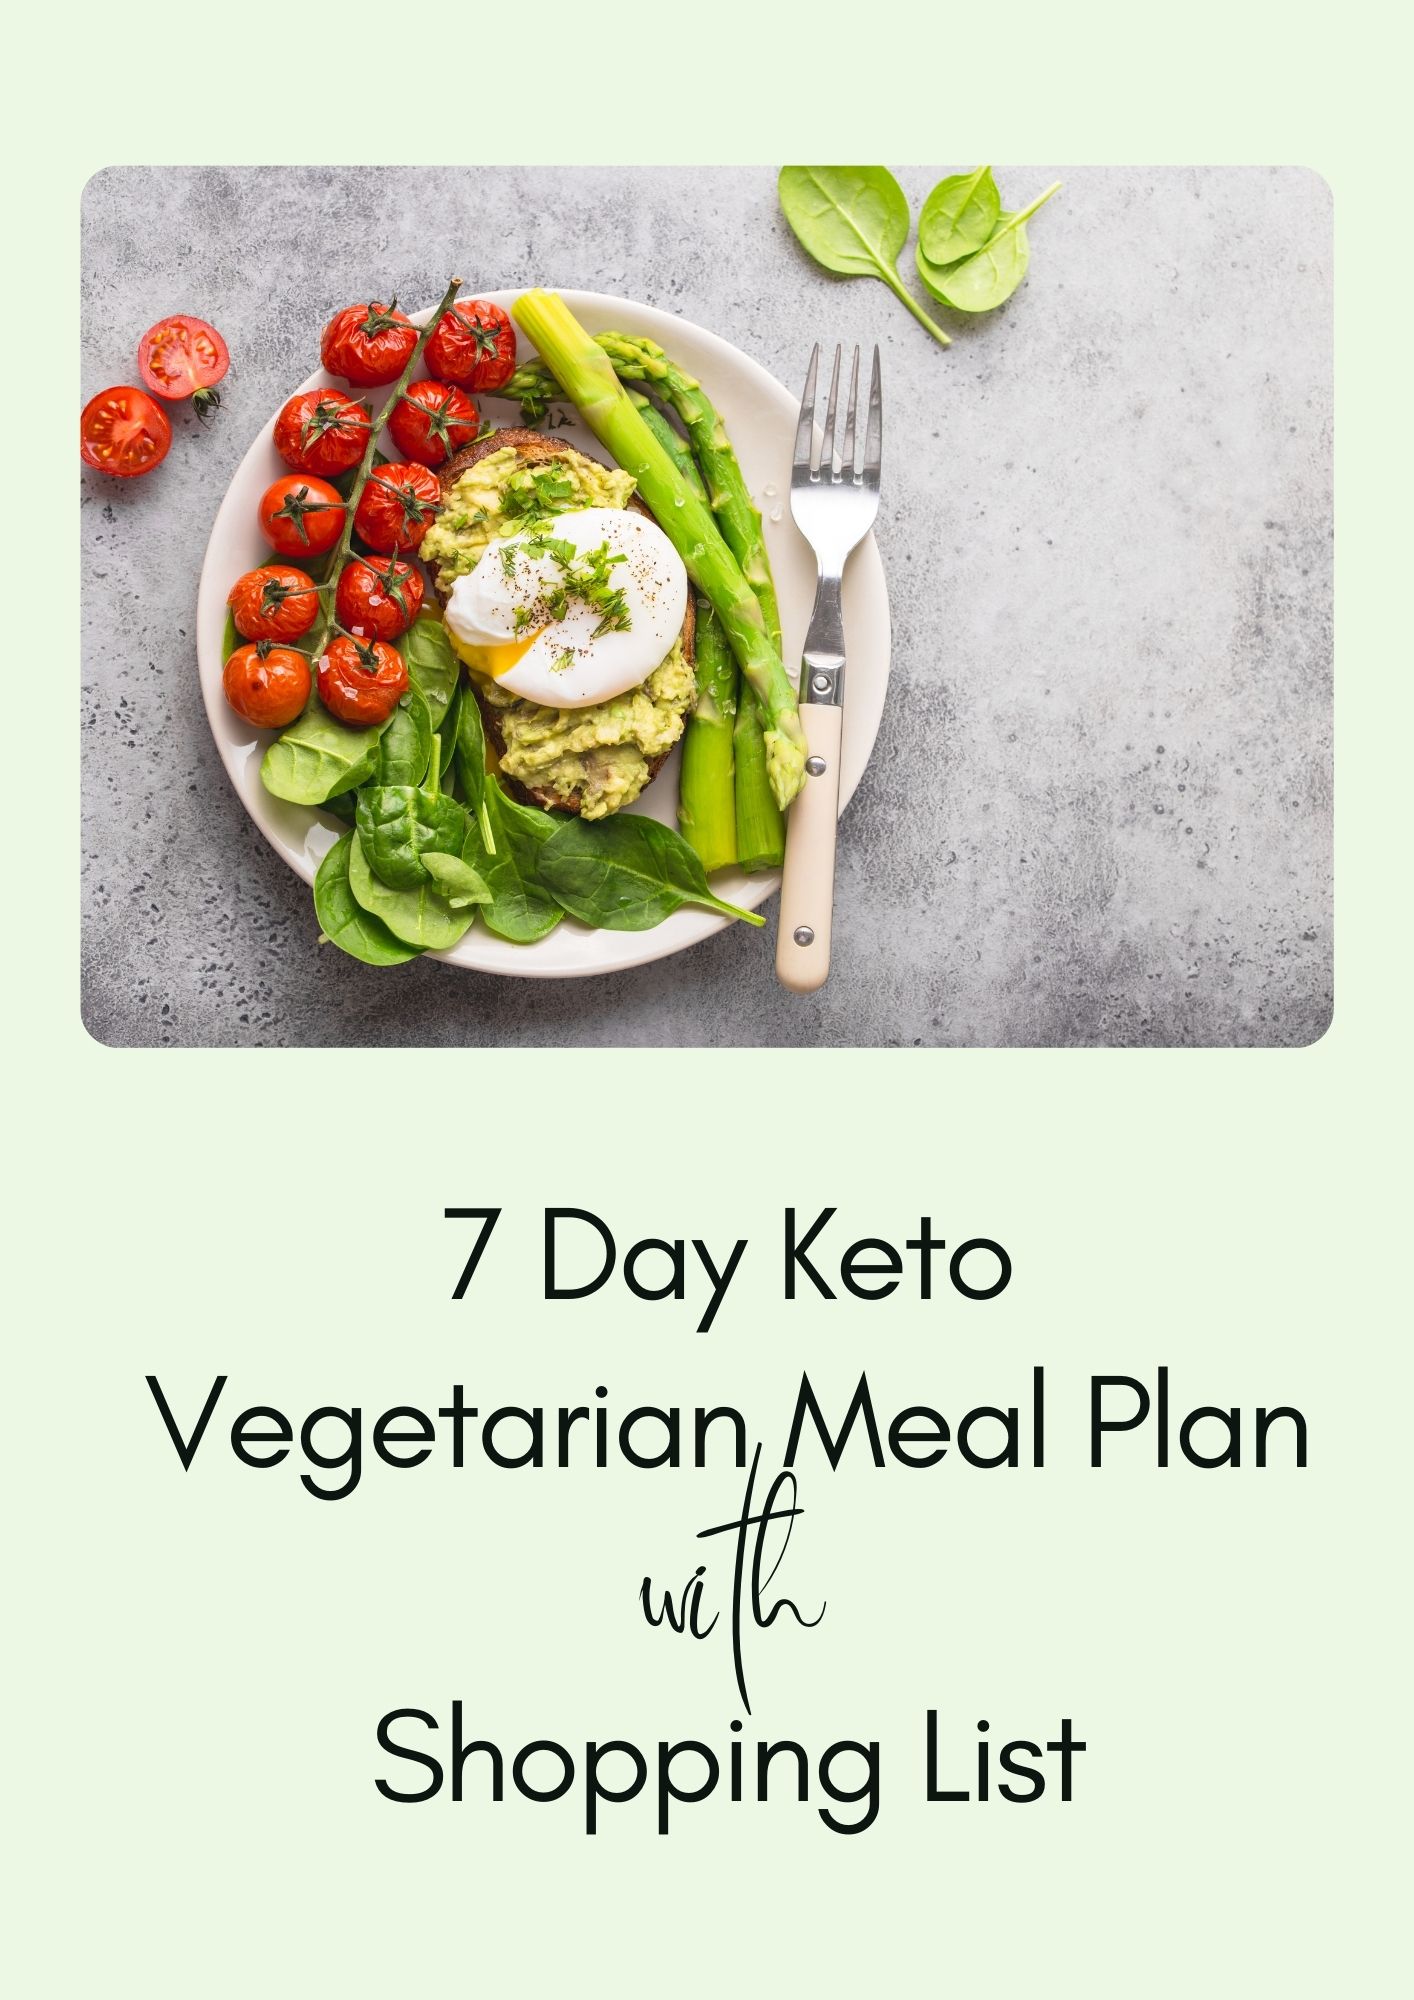 Get ready to transform your diet with our comprehensive 7 day keto vegetarian meal plan. This carefully curated plan includes a variety of delicious and nutritious recipes that follow both the keto and vegetarian lifestyle. With a